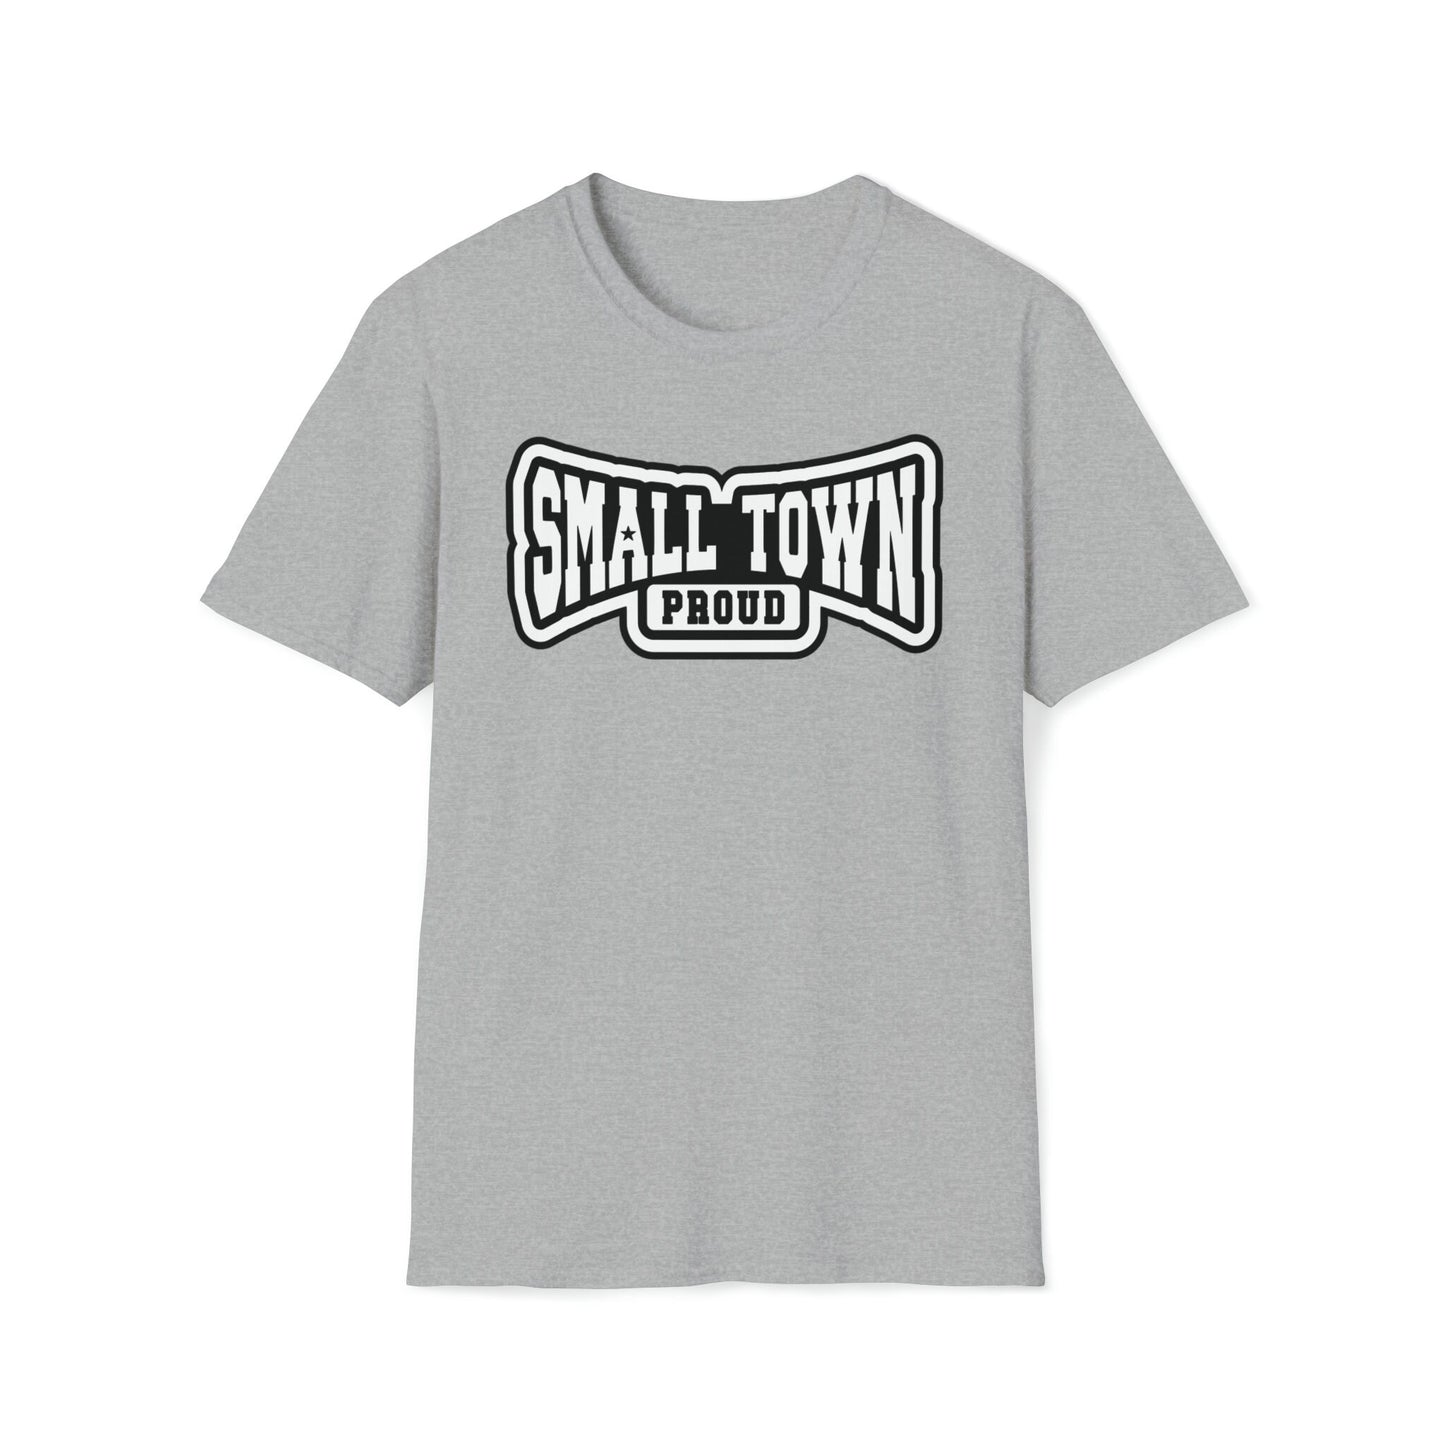 Small Town Proud Graphics Shirt - Small Town Living - Country Proud graphic